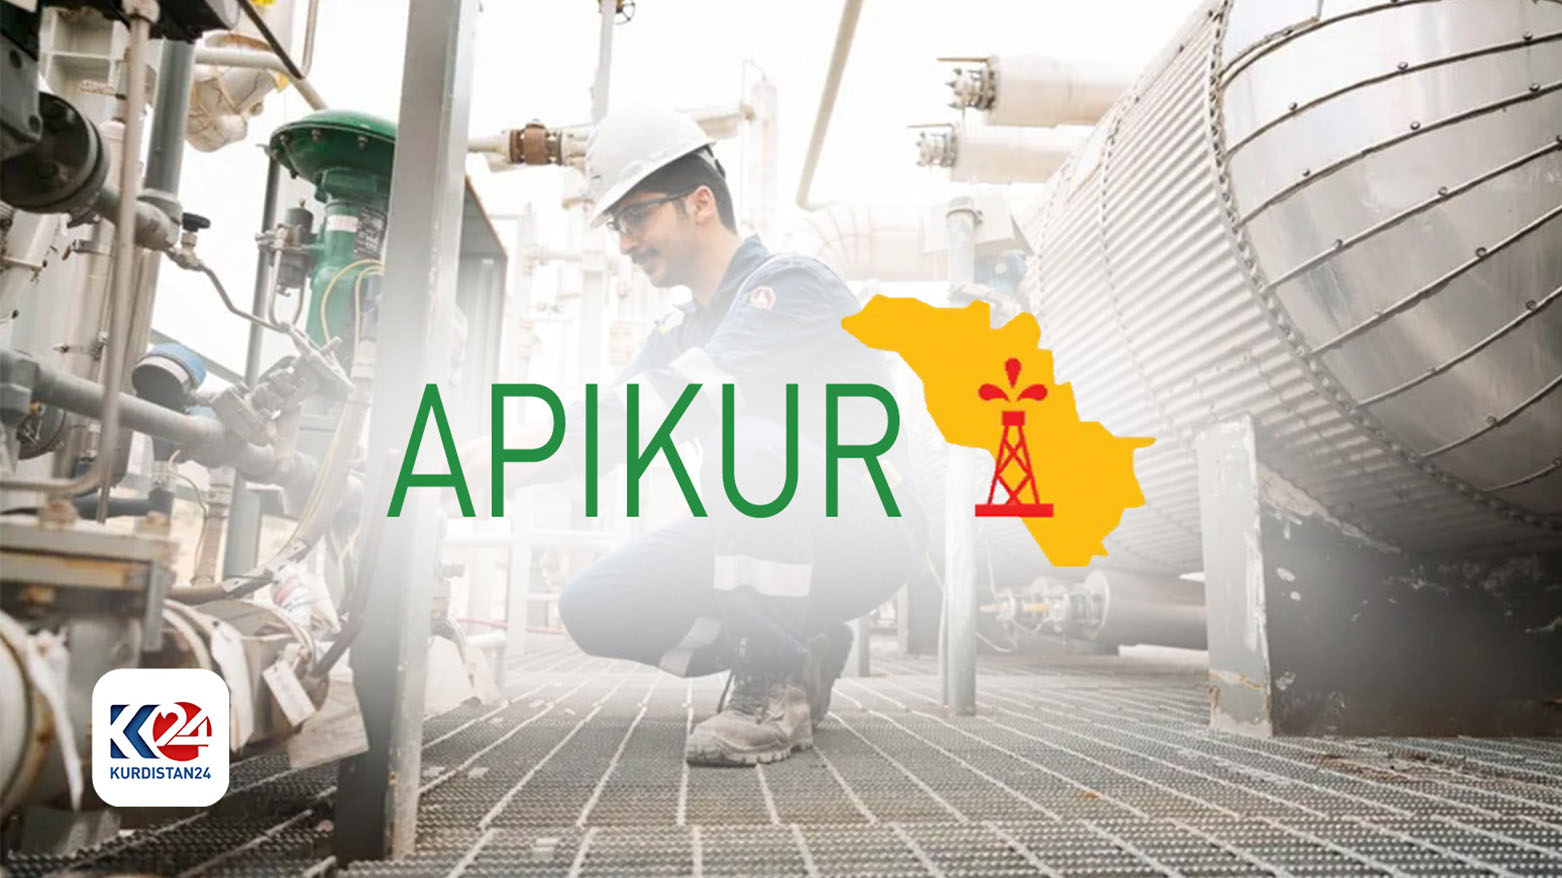 The Association of the Petroleum Industry of Kurdistan (APIKUR) welcomed discussions between Baghdad and Erbil on resuming oil exports (Photo: APIKUR/K24)